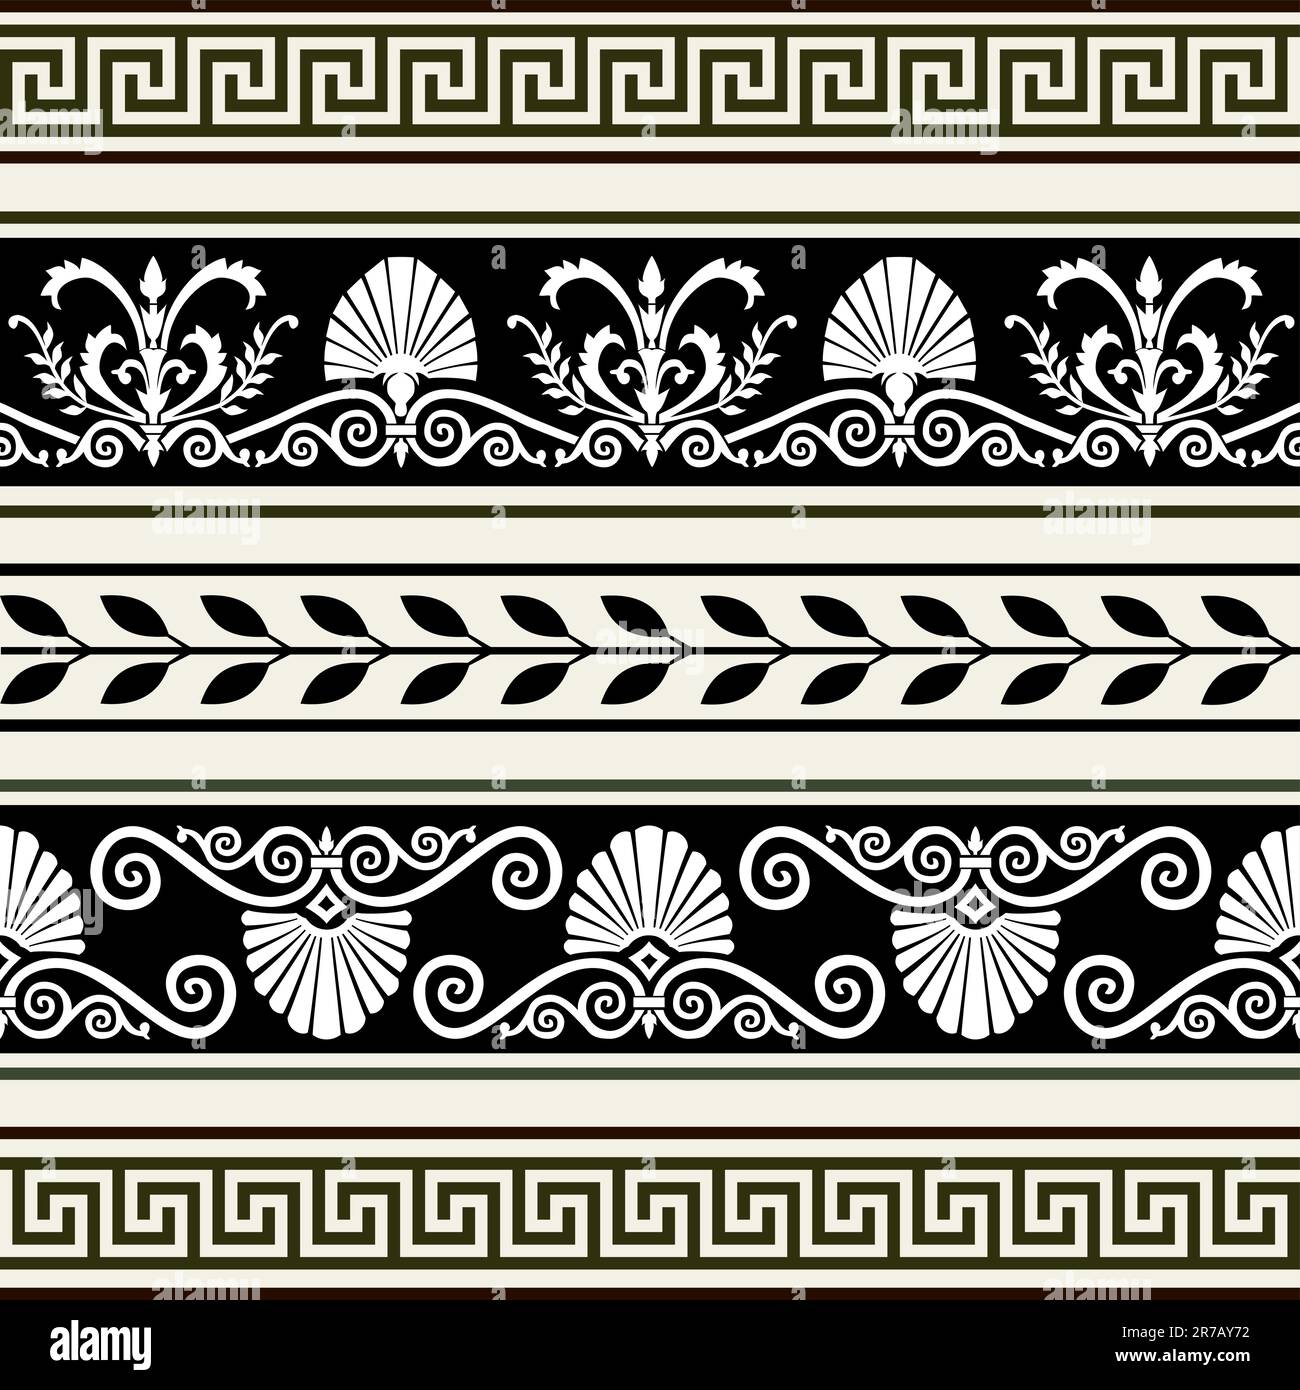 Decorative vector ornaments, antique greek borders, full scalable vector graphic included Eps v8 and 300 dpi JPG. Stock Vector